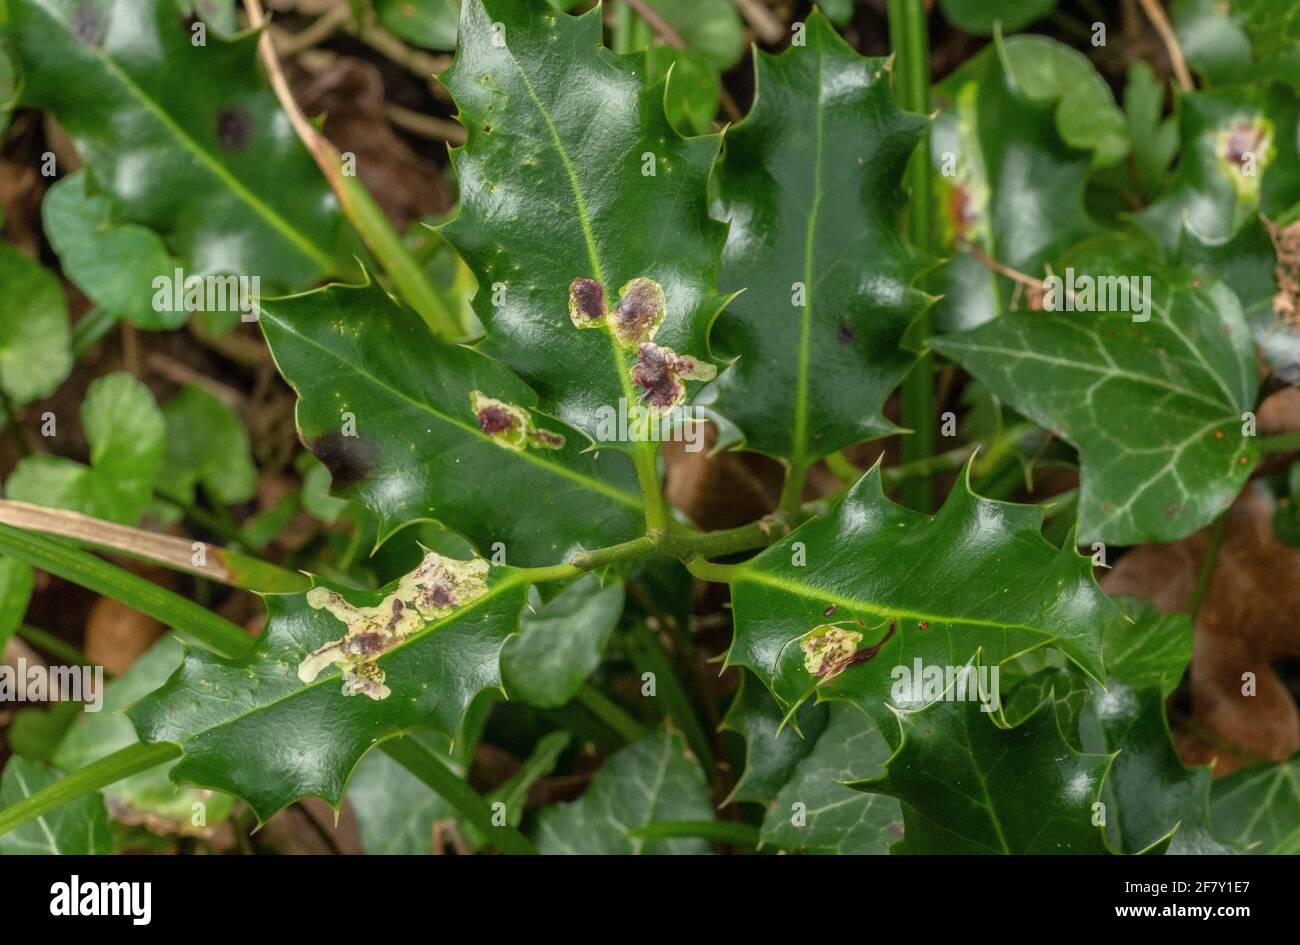 Galls on Holly leaf caused by Phytomyza ilicis, theHolly leaf miner. Stock Photo